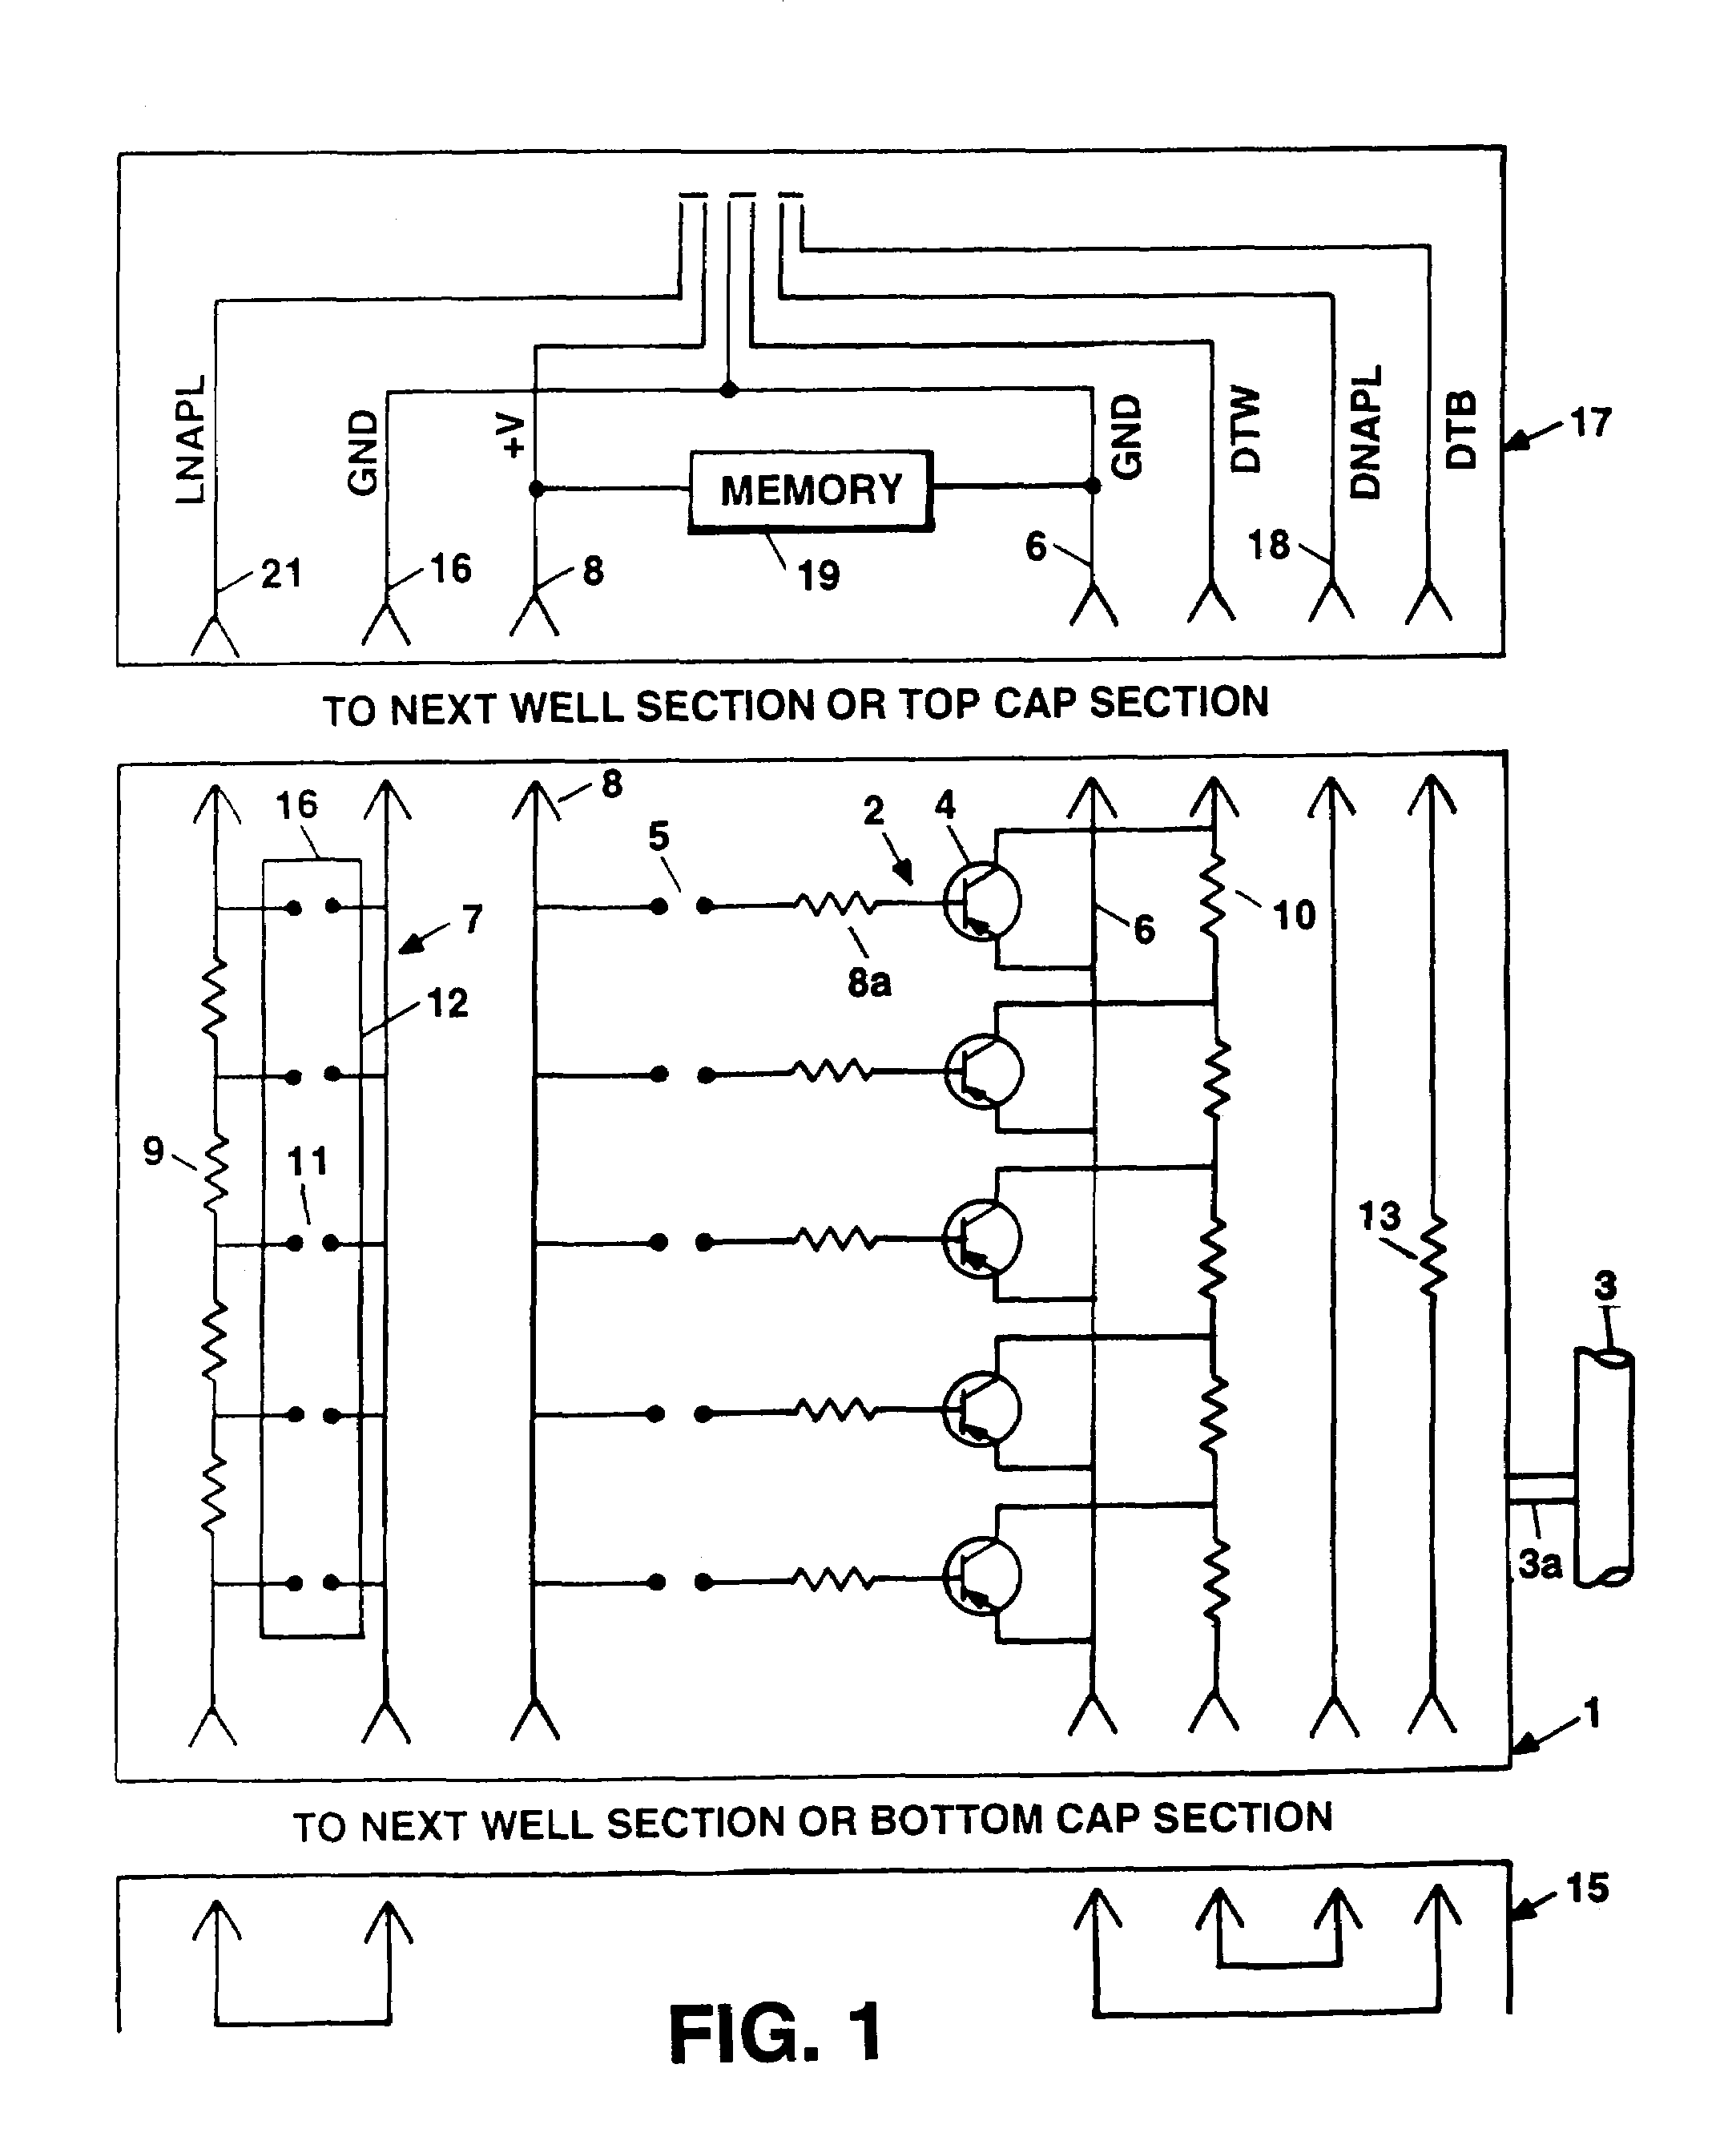 Apparatus for rapidly measuring liquid levels and volume of groundwater within wells that eliminates cross contamination between wells